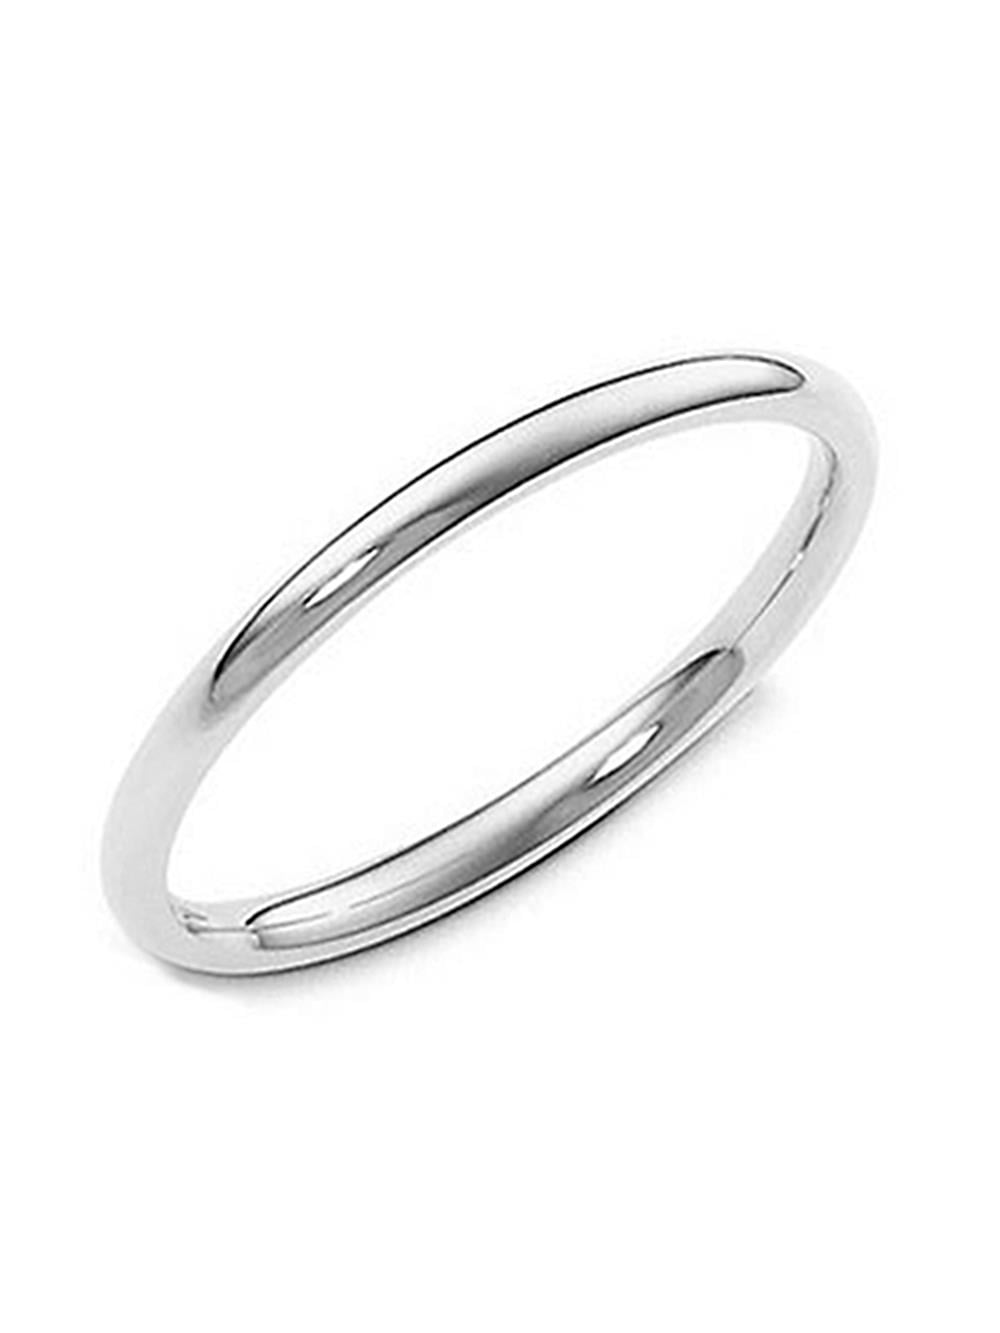 2MM Sterling Silver High Polish Plain Dome Tarnish Resistant Comfort Fit  Wedding Band Ring Sz 7